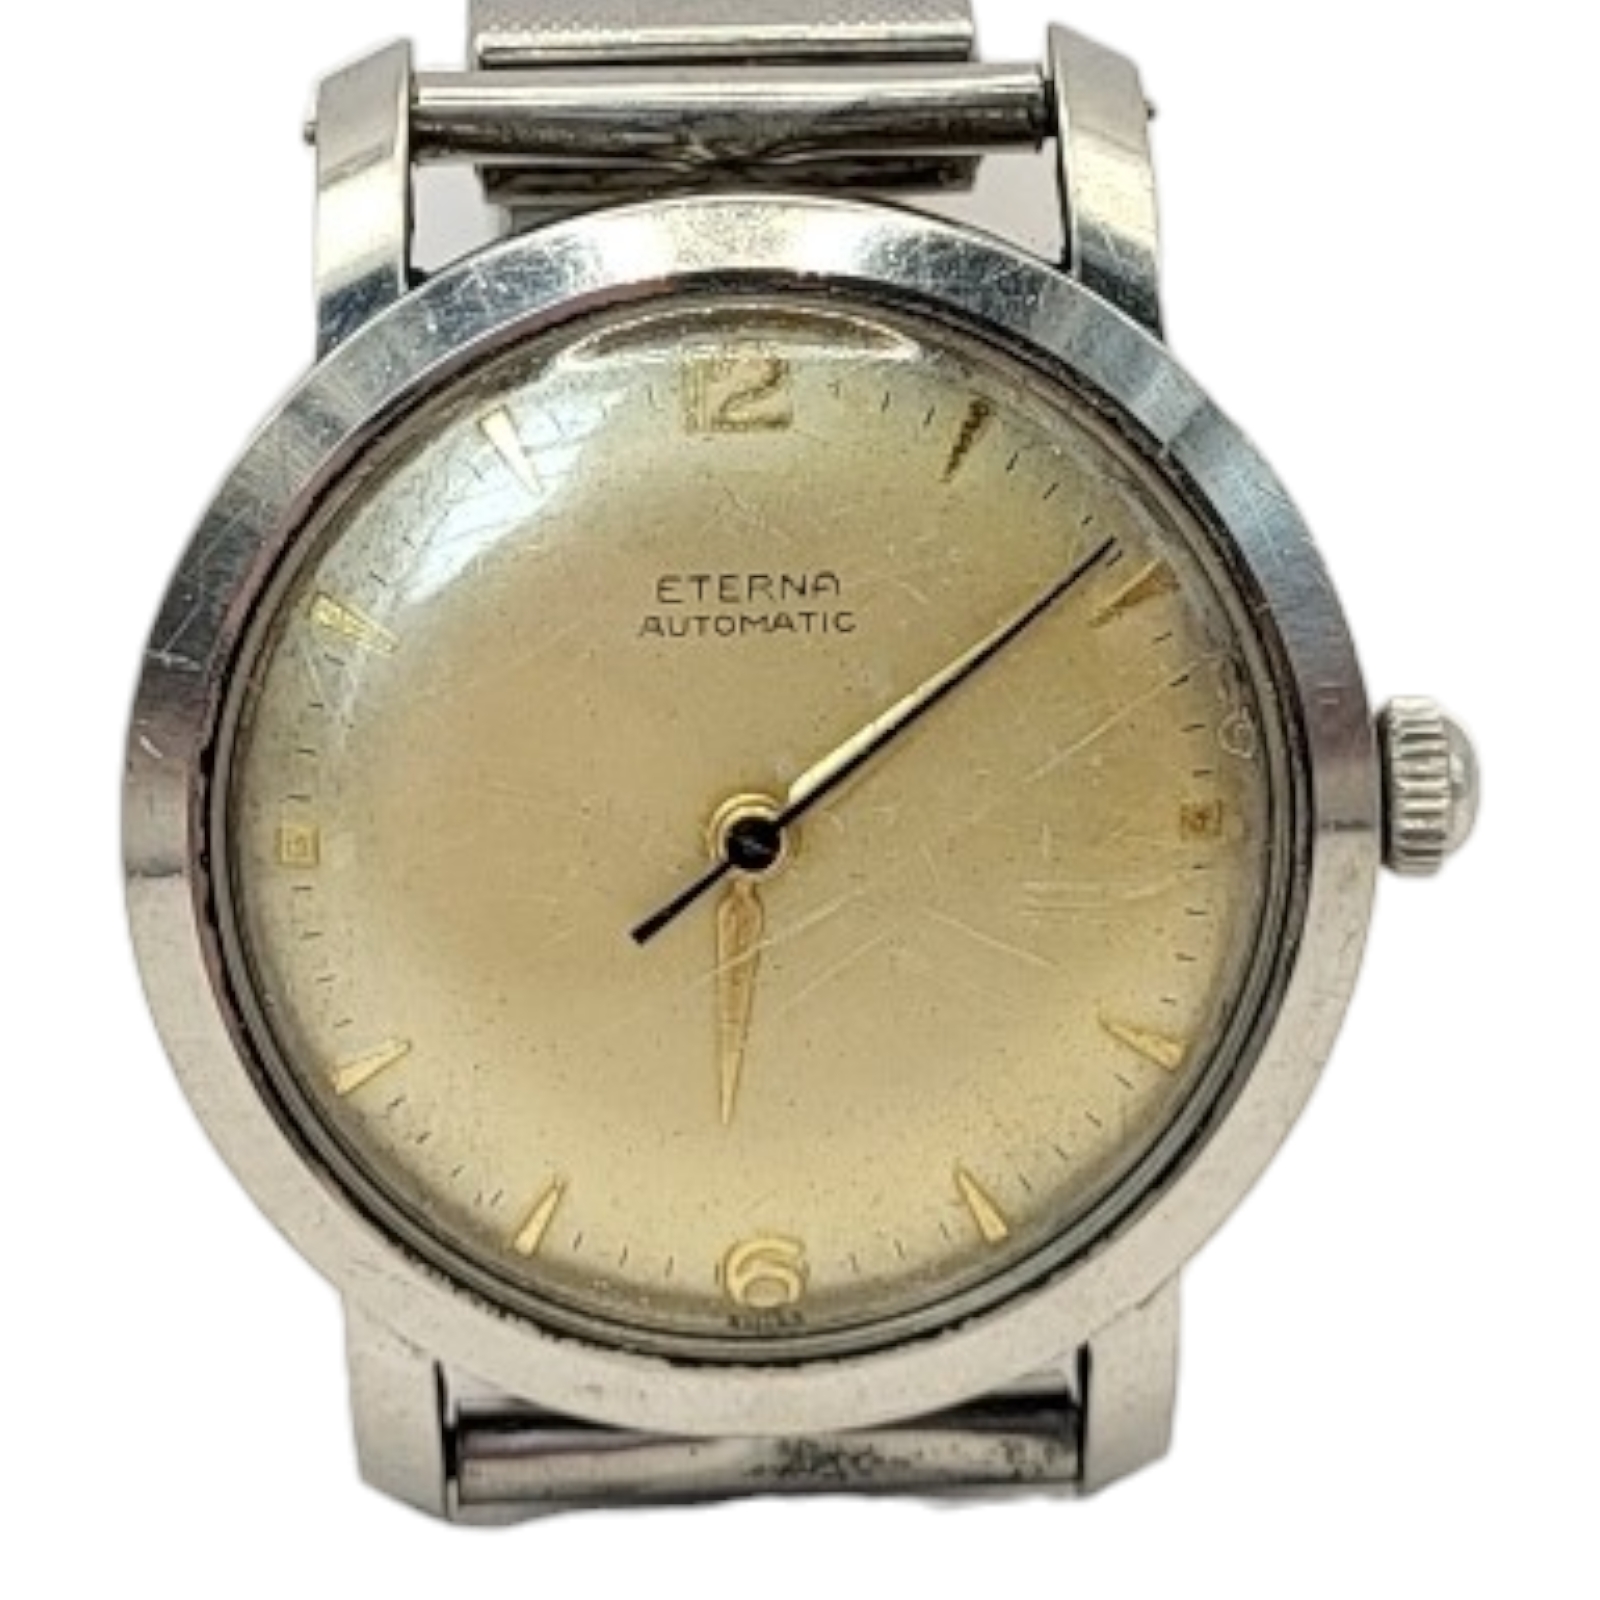 ETERNA, A VINTAGE STAINLESS STEEL AUTOMATIC GENT’S WRISTWATCH Gold tone dial with gilt number - Image 2 of 3